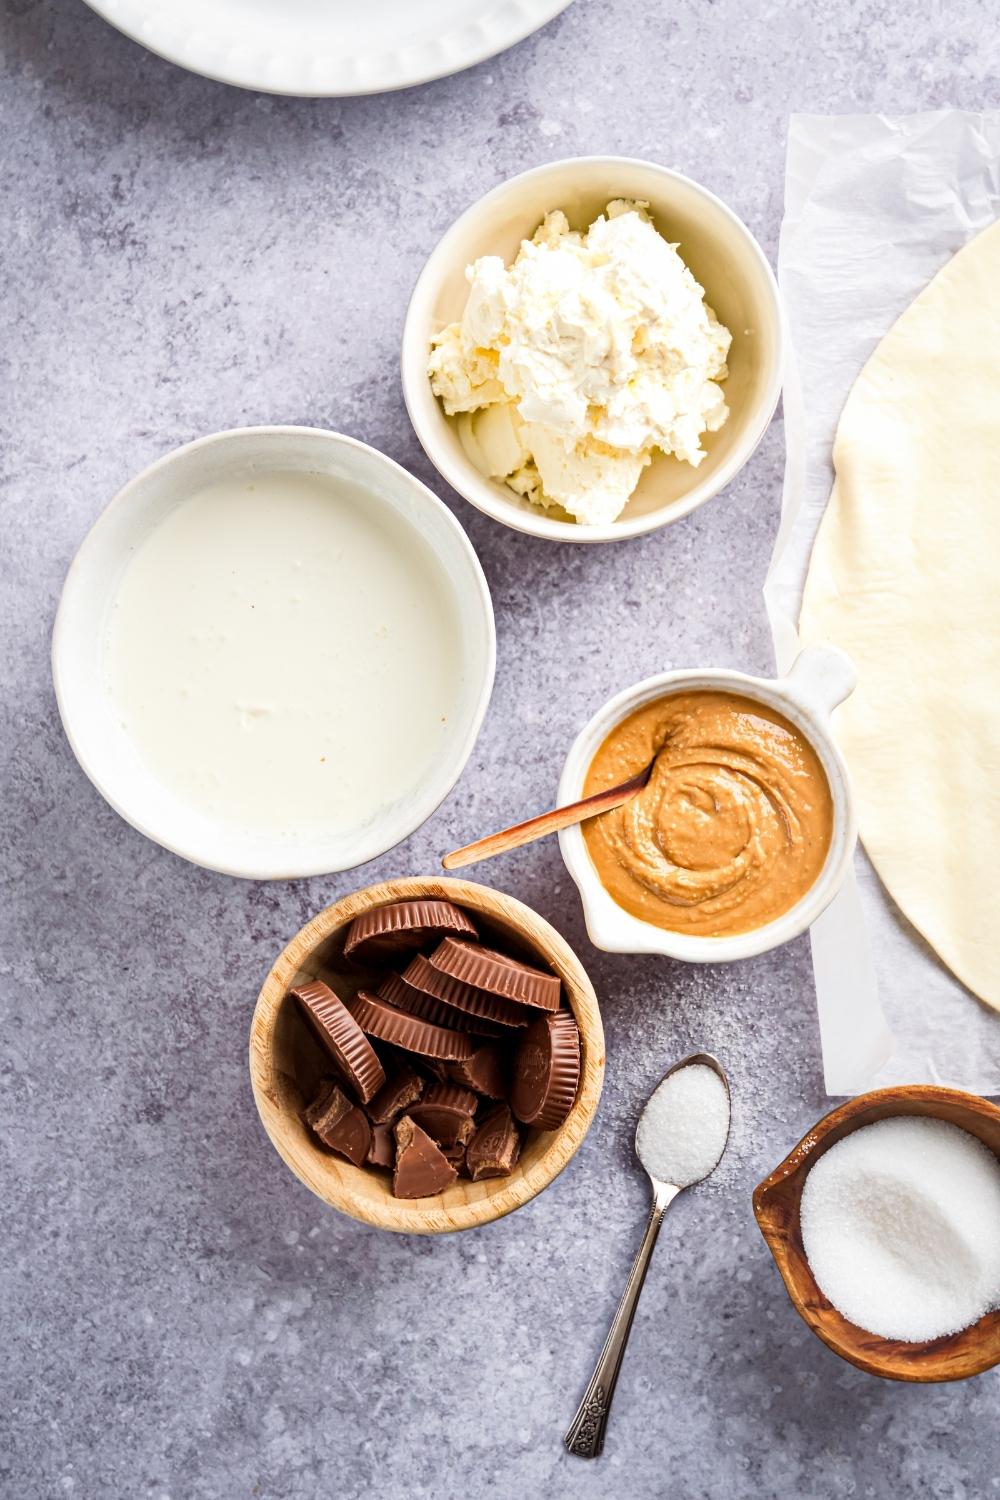 An overview of all of the Reeses pie ingredients. A large bowl holds heavy whipping cream, a smaller bowl holds cream cheese, the same size bowl holds Reeses peanut butter cups, a smaller bowl holds creamy peanut butter, and a small bowl next to that holds sugar.